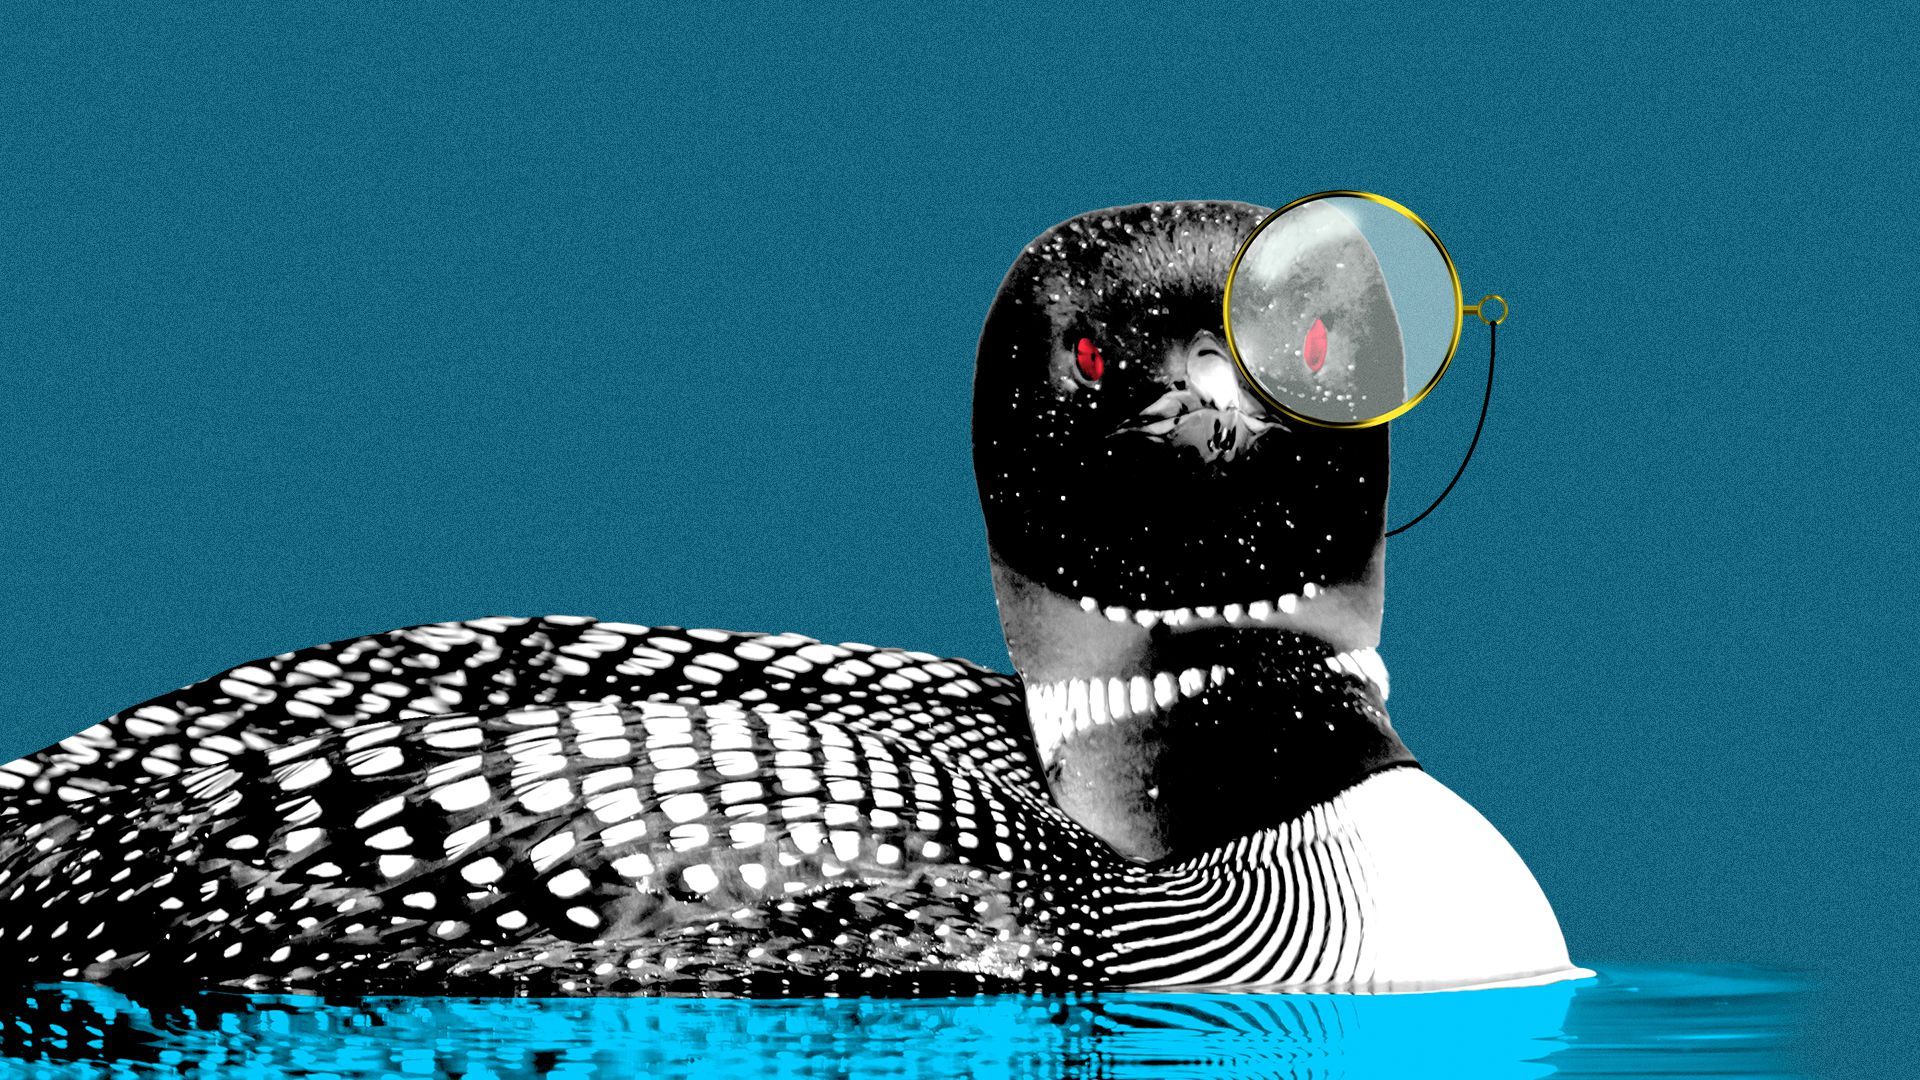 Illustration of a loon wearing a monocle.